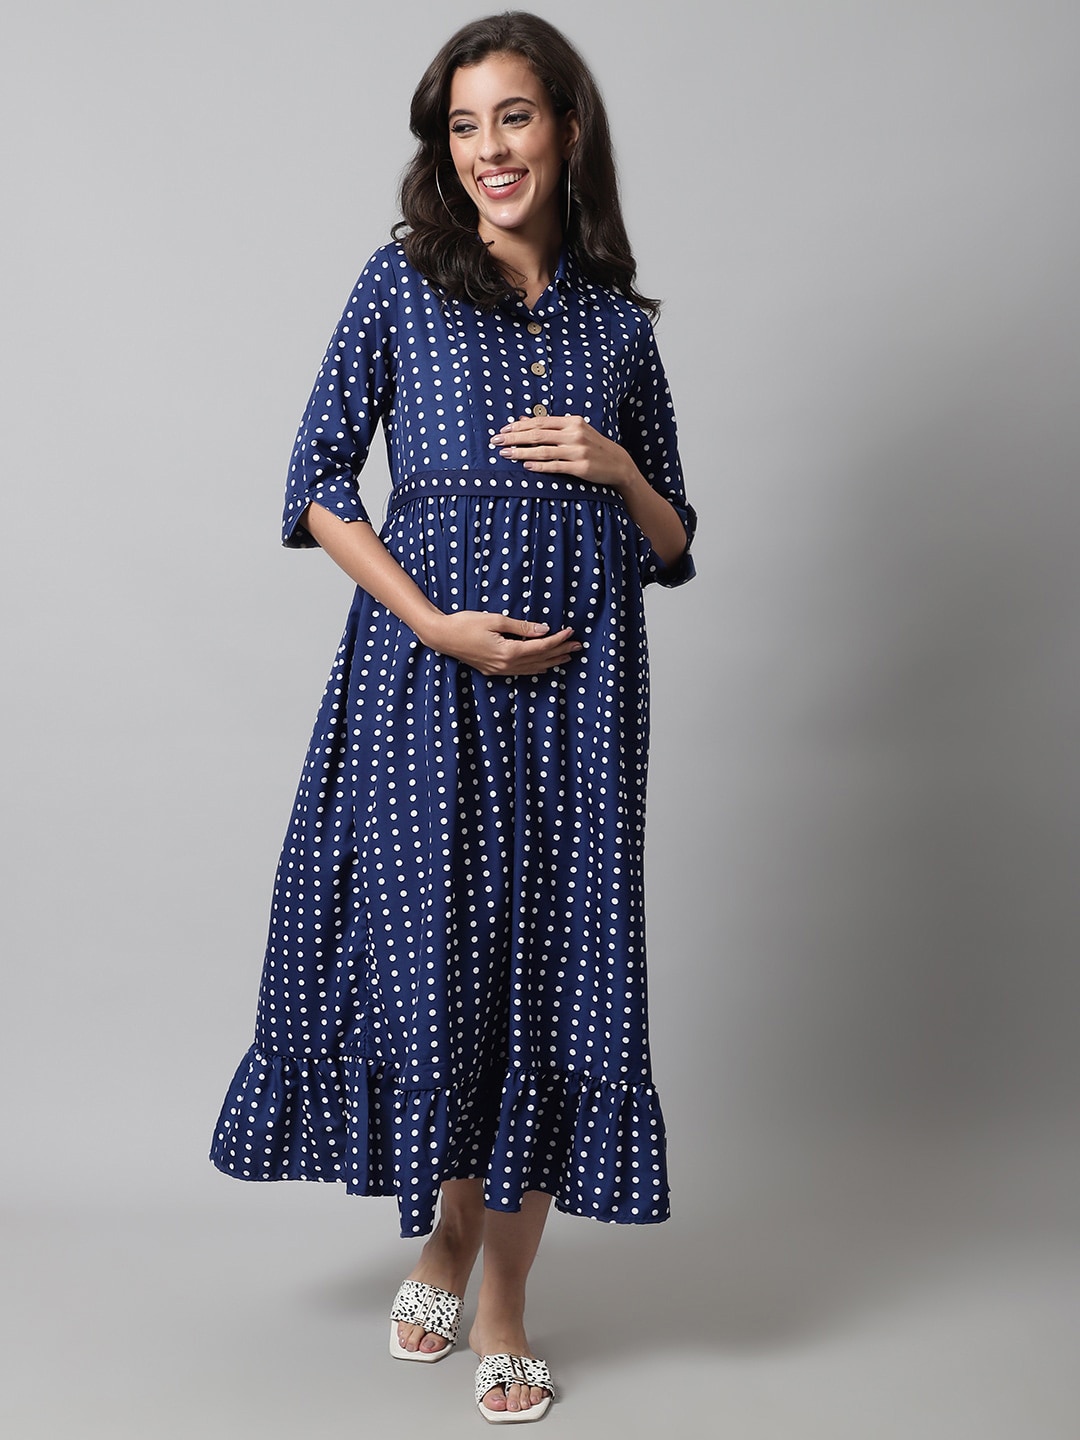 Frempy Maternity Maxi Dress Price in India